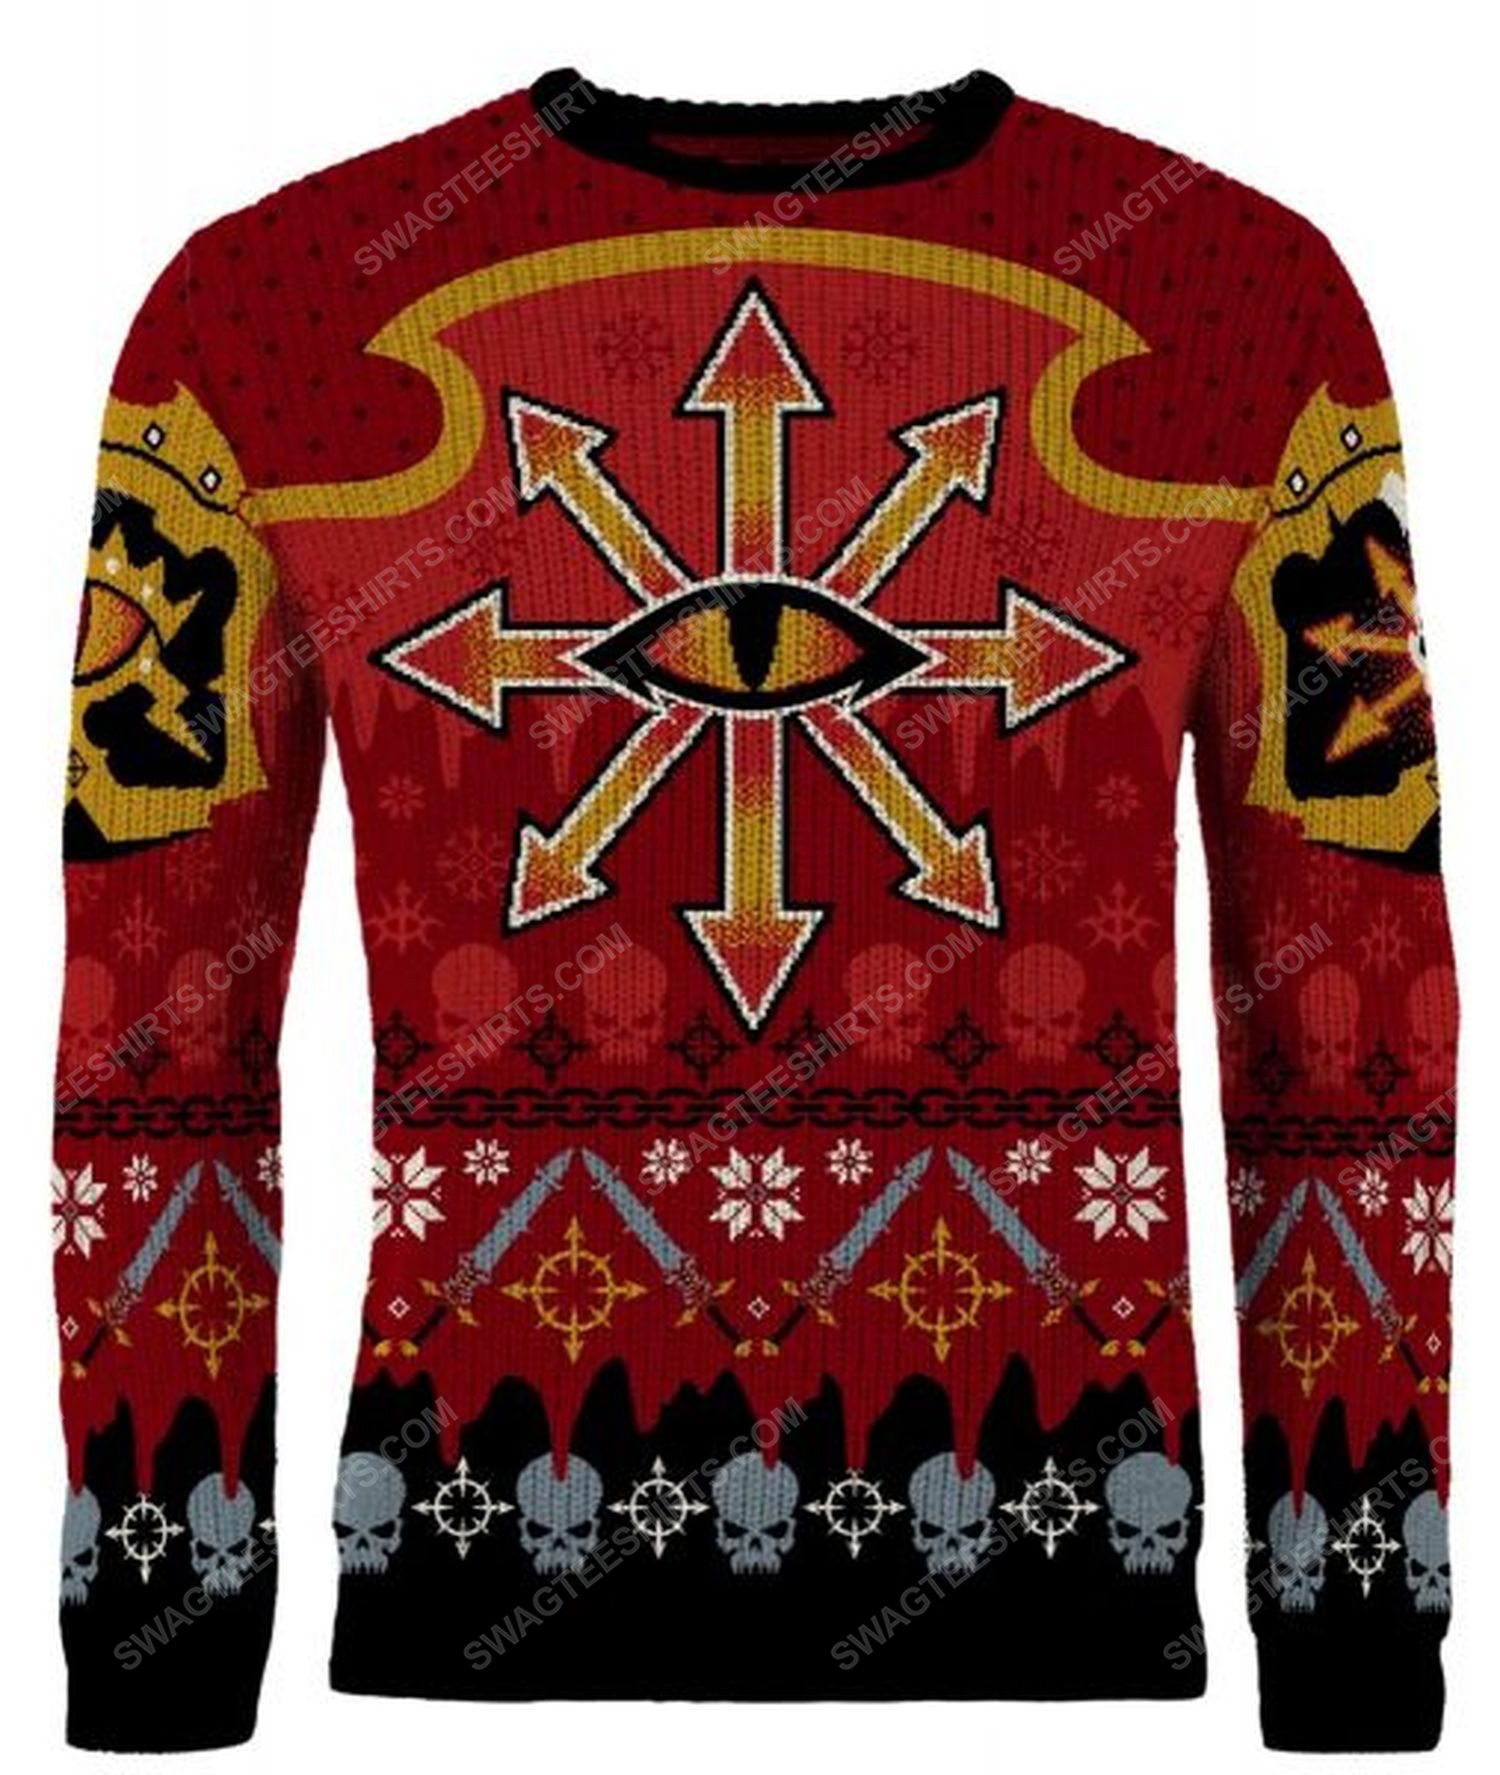 Christmas holiday chaos reigns khorne full print ugly christmas sweater 2 - Copy (2)